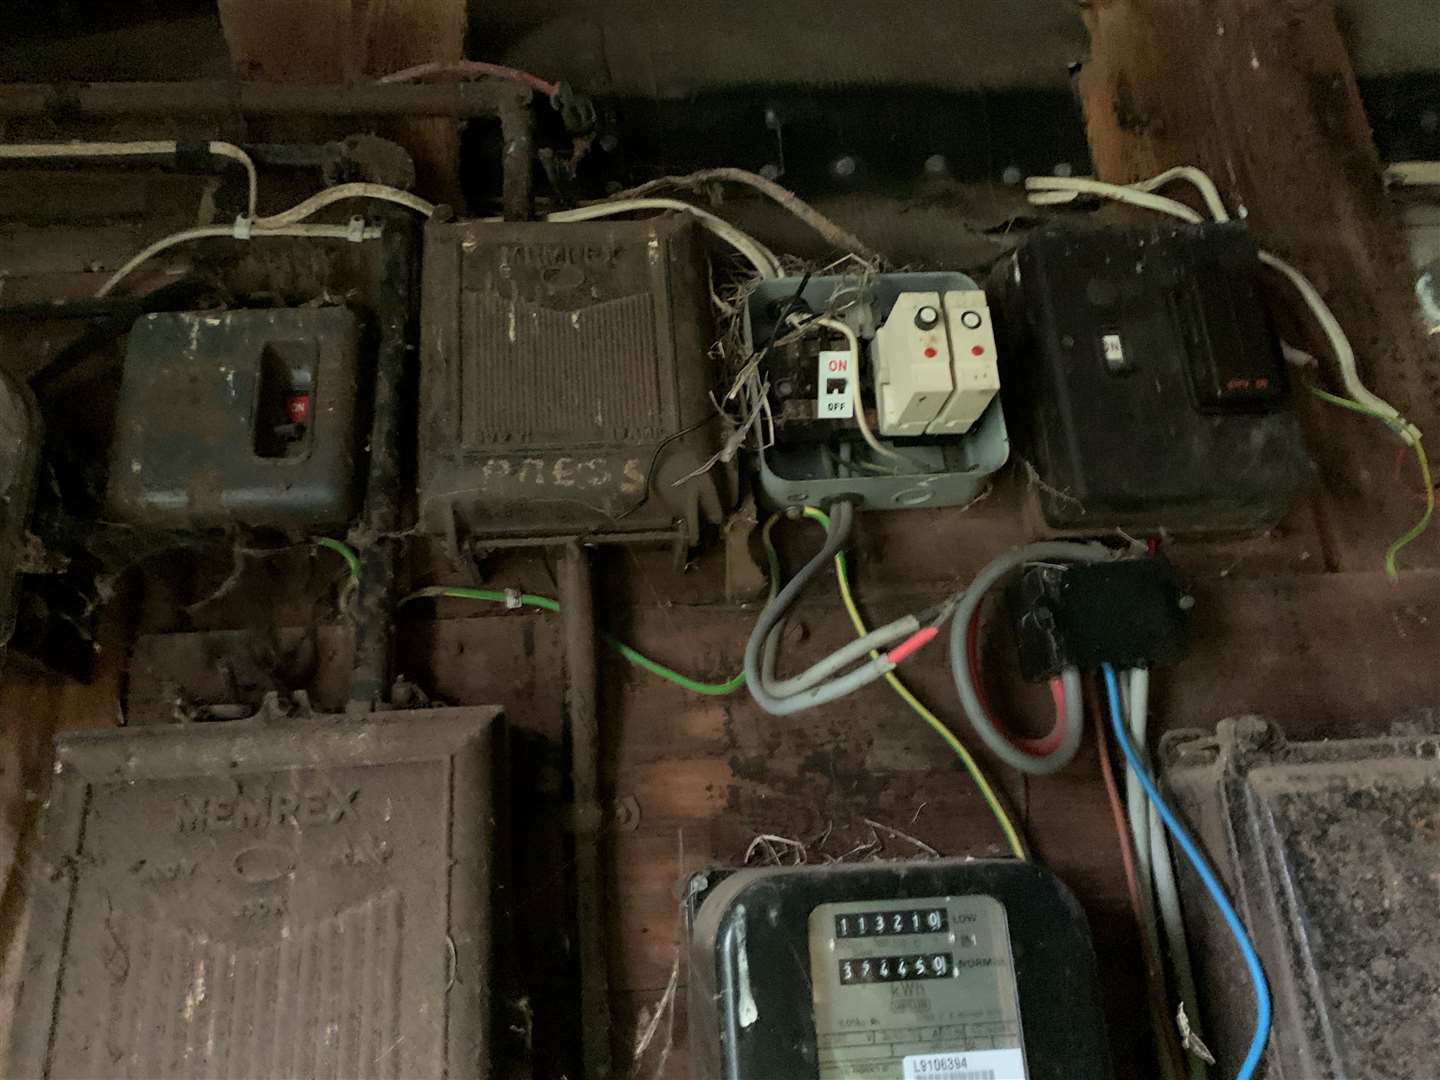 Exposed electrics at the farm was one of many issues